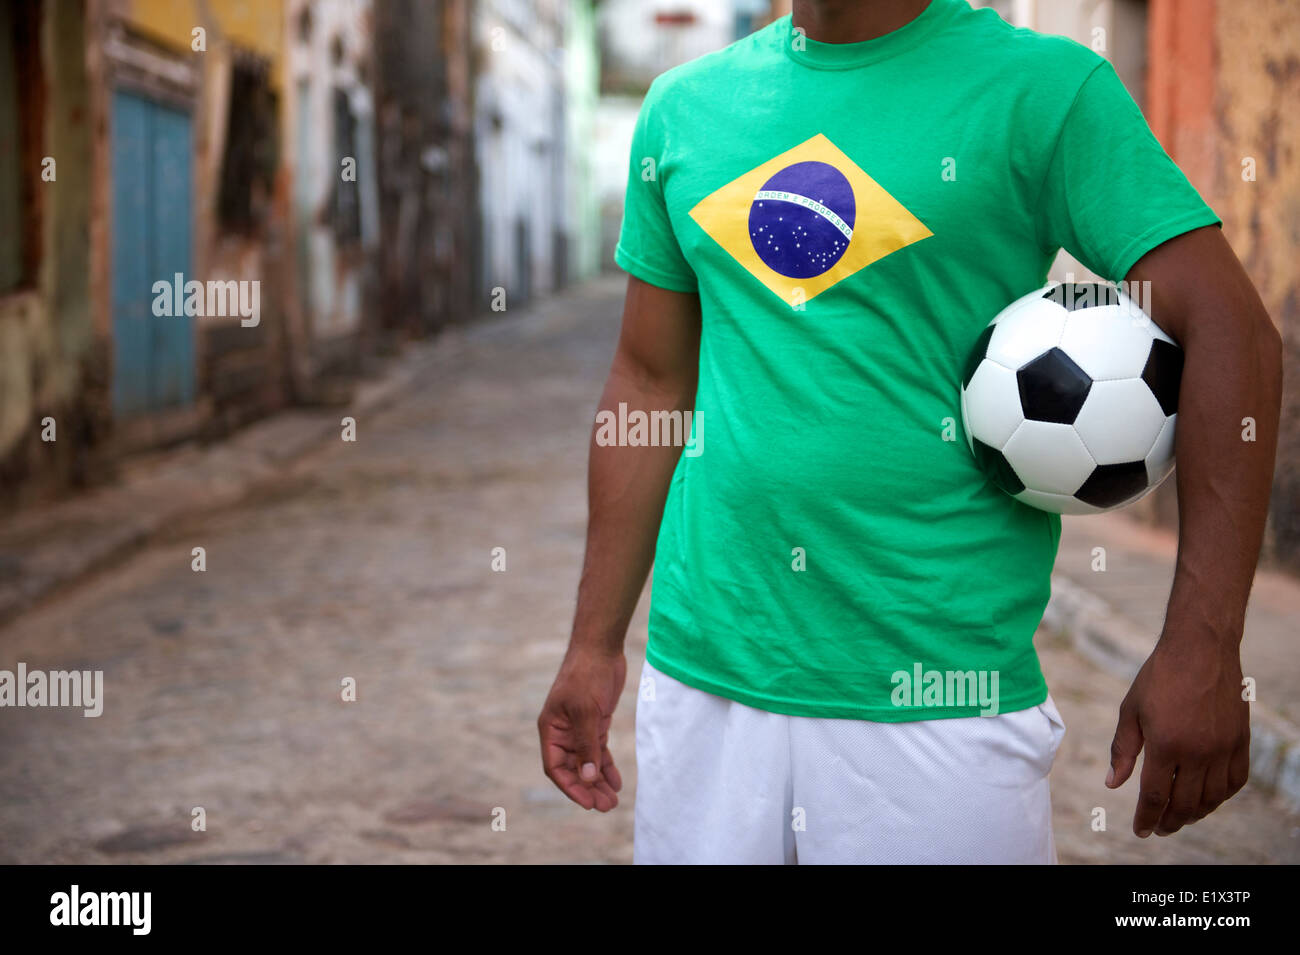 Brazilian street football player standing in Brazil flag t-shirt holding soccer ball in an old rustic village Stock Photo